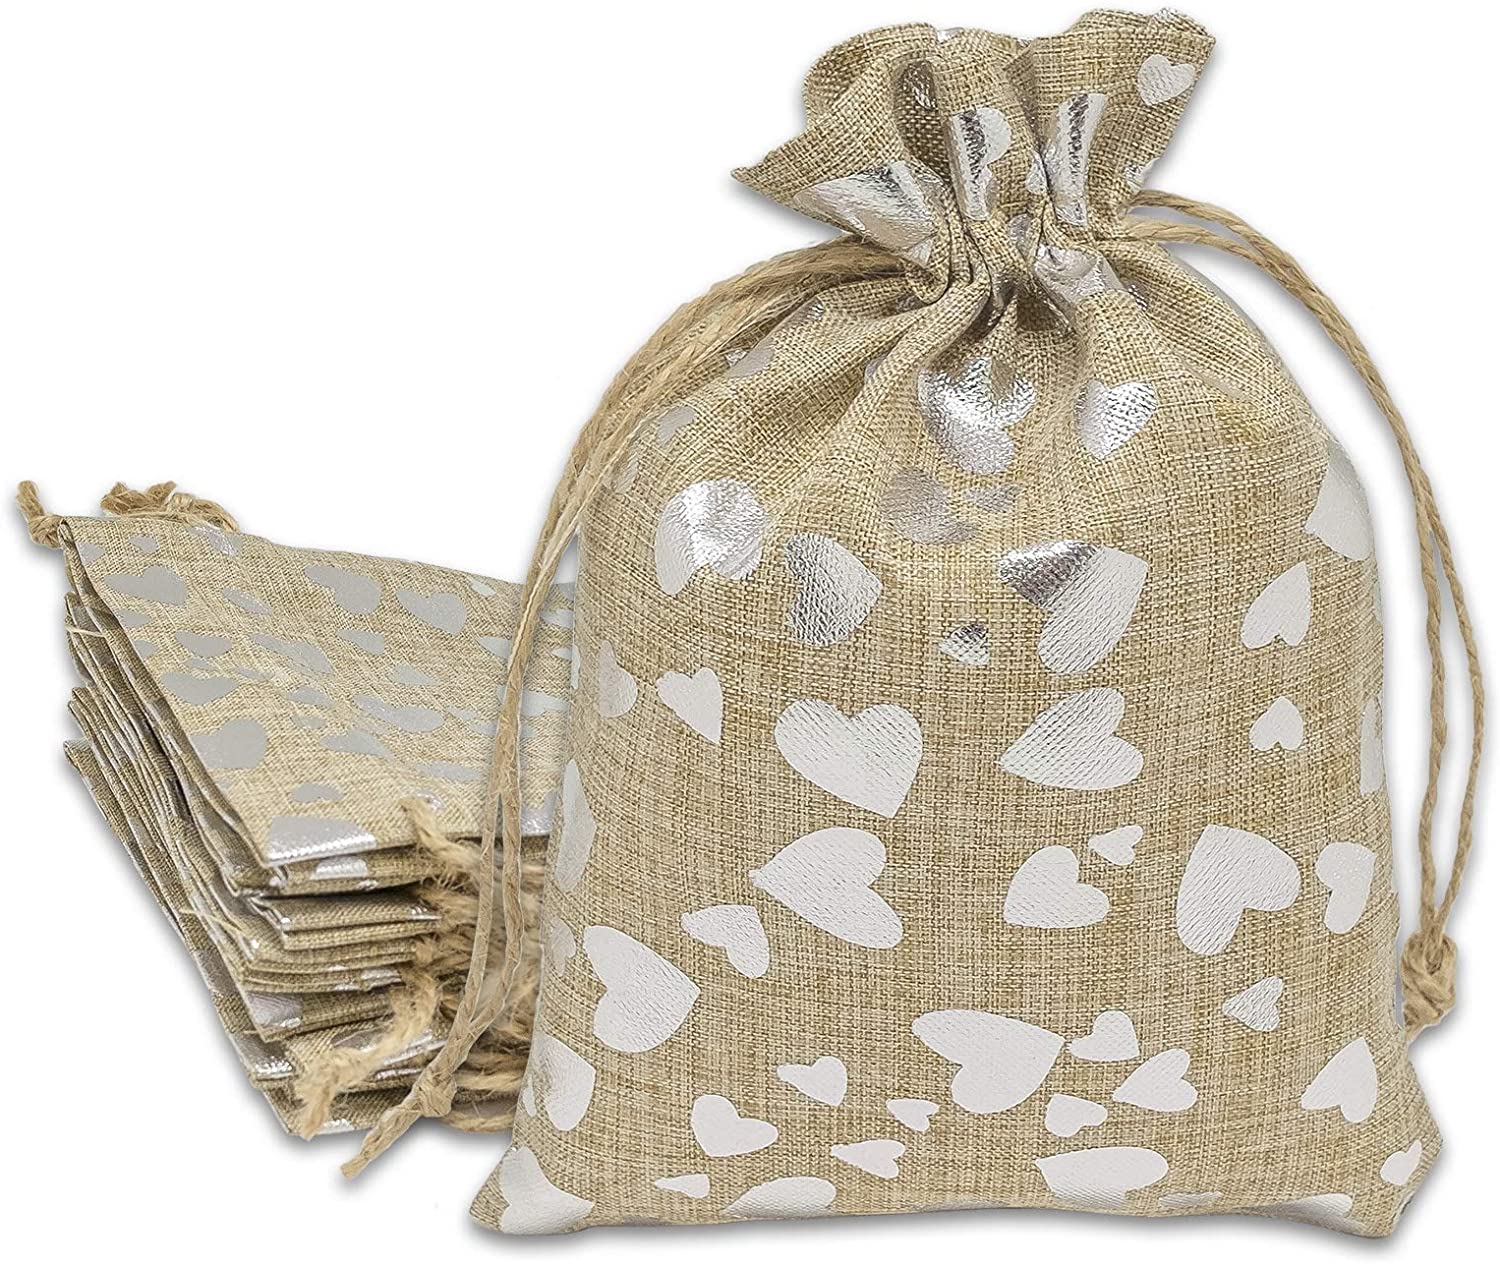 Add A Gift Bag.  Tan Jute colored bag with silver hearts.